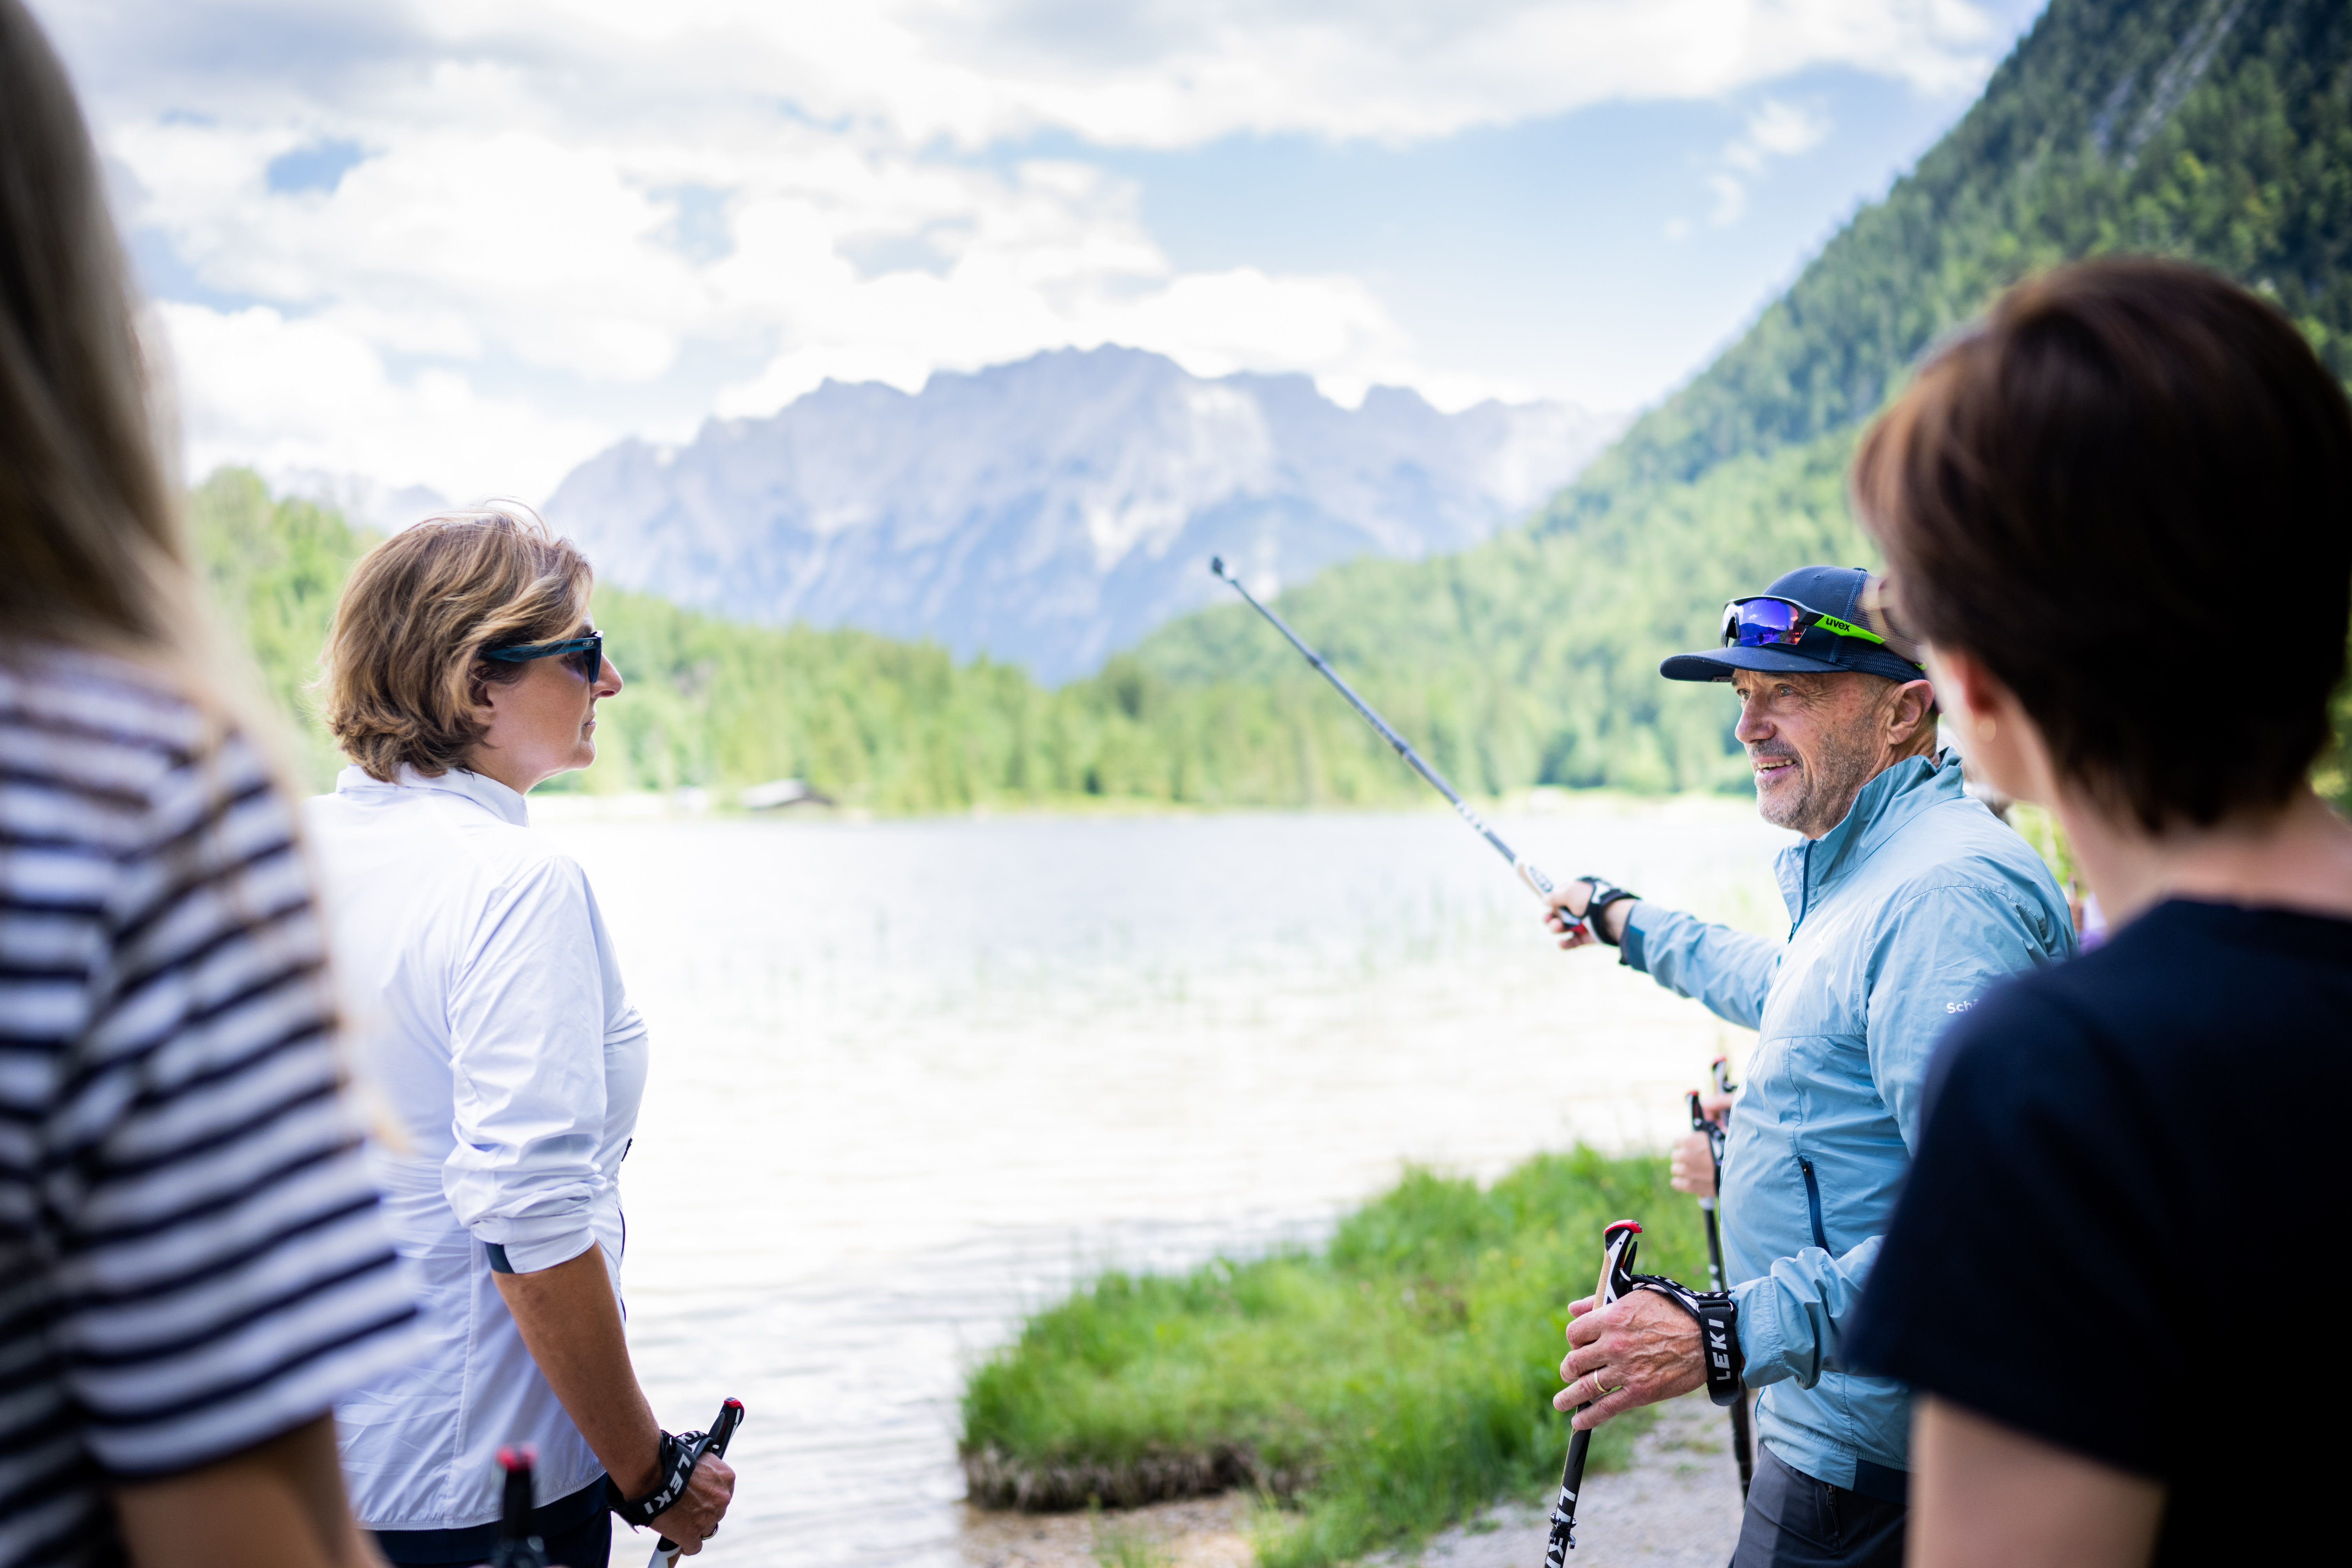 Christian Neureuther (at right) talks to Britta Ernst (at left) during a Nordic walking tour along the banks of the Ferchensee.